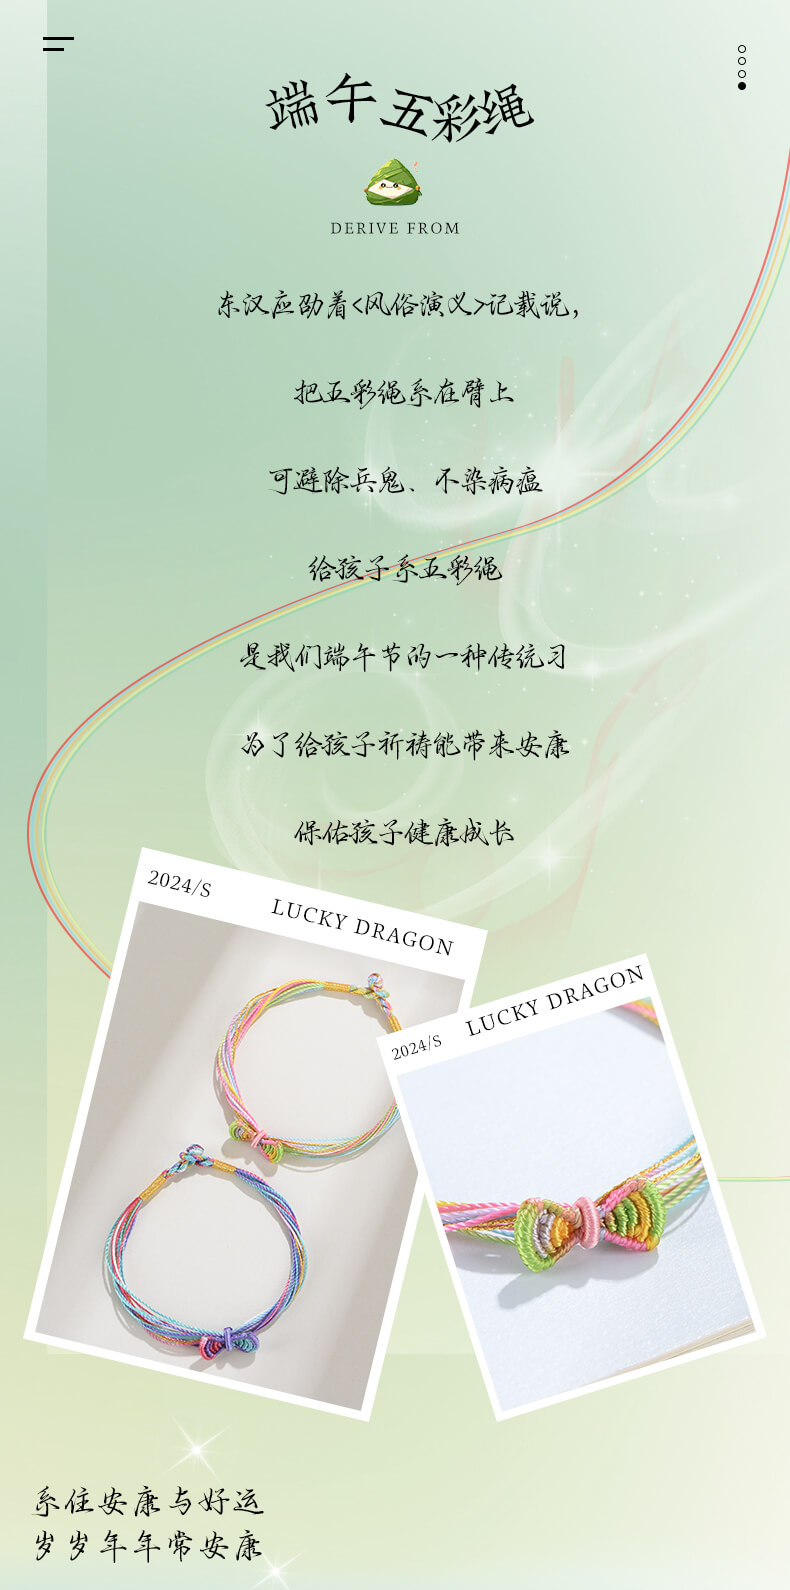 《Colorful Dream》 Dragon Boat Festival Colorful Rope Butterfly Knot Children's Hand Rope